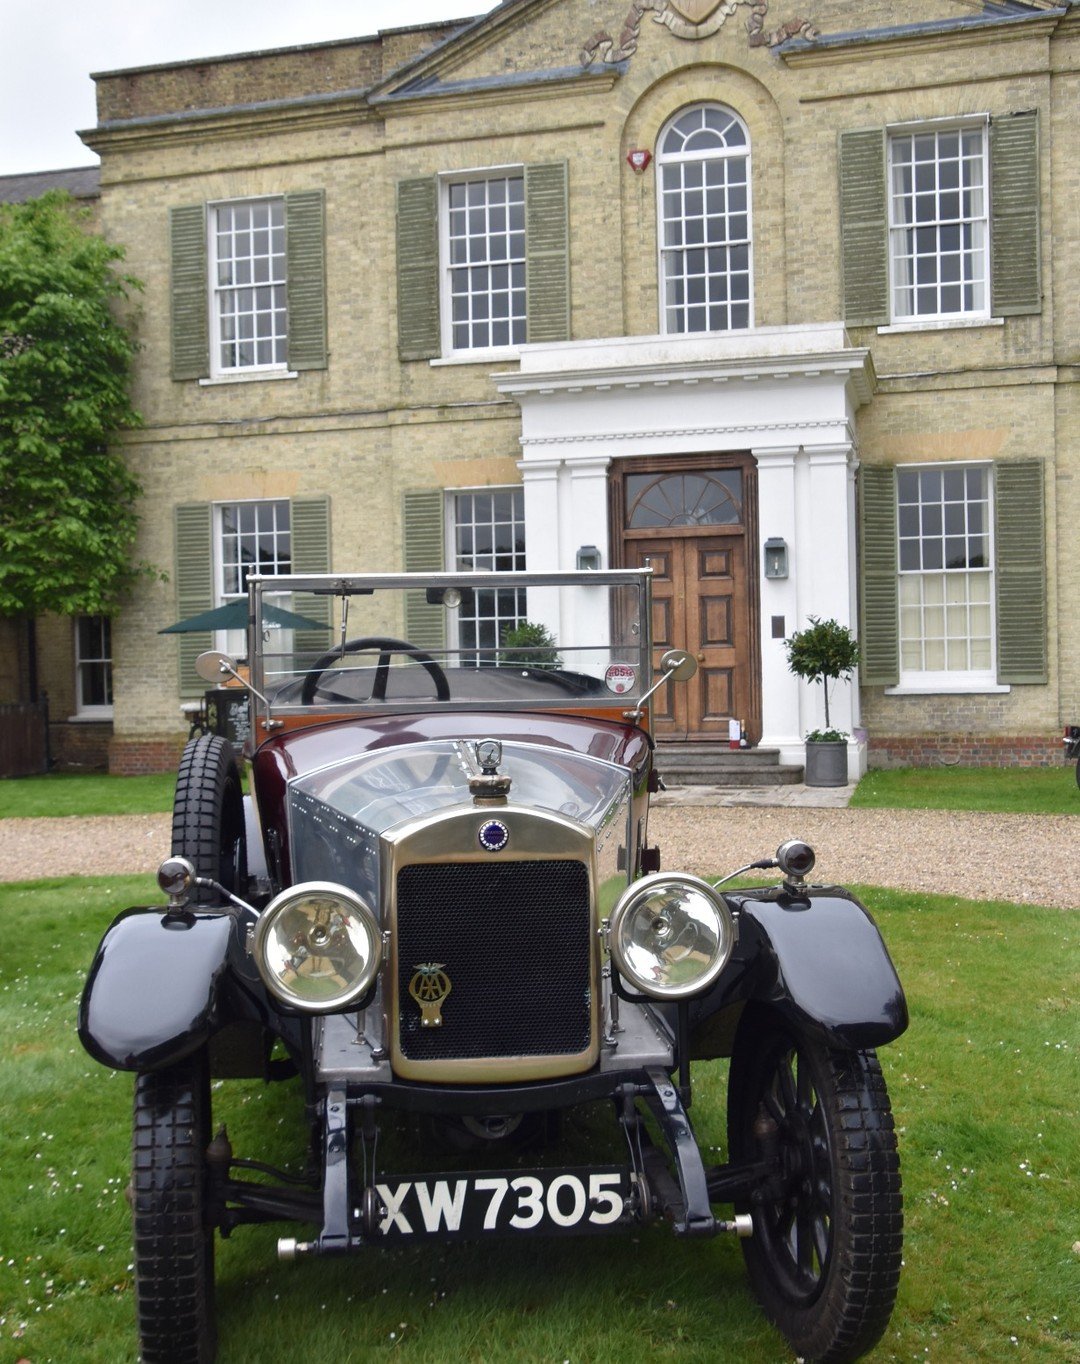 Looking for something fun to do on Bank Holiday Monday? We'll be welcoming back The Friends of St John the Baptist Classic Car Rally - an eclectic collection of classic and vintage cars will be on show and there'll be a bbq and lashings of tea and ca